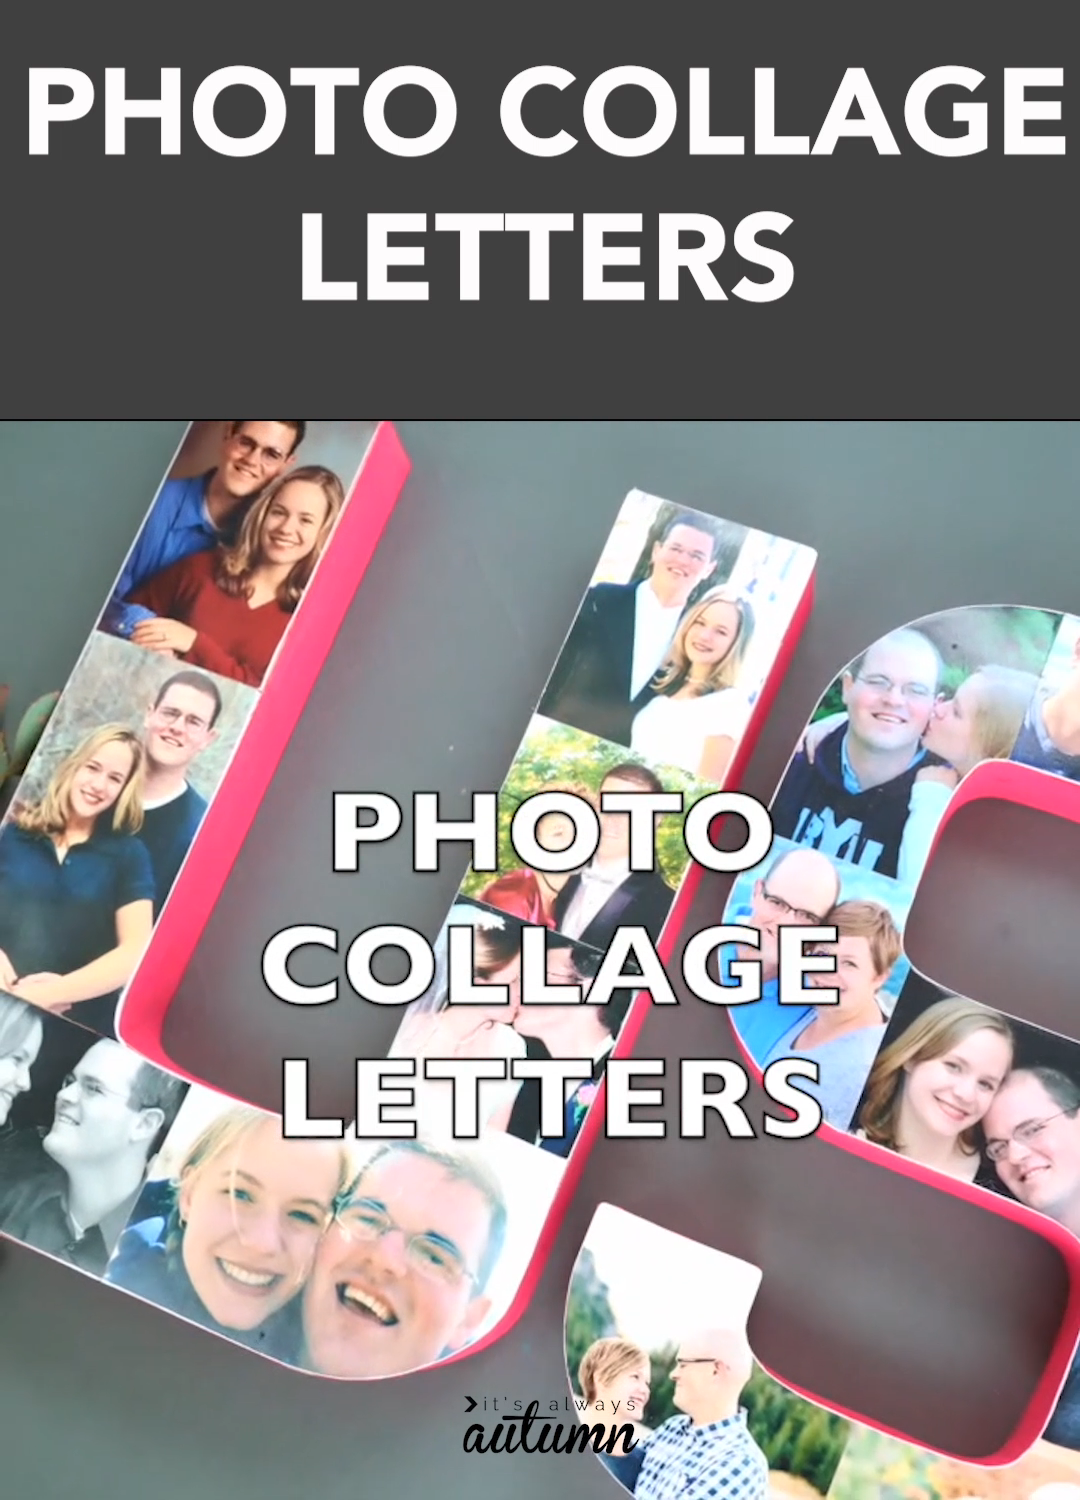 Photo collage letters for Valentine's Day or anniversaries - It's Always Autumn -   diy Gifts for sisters